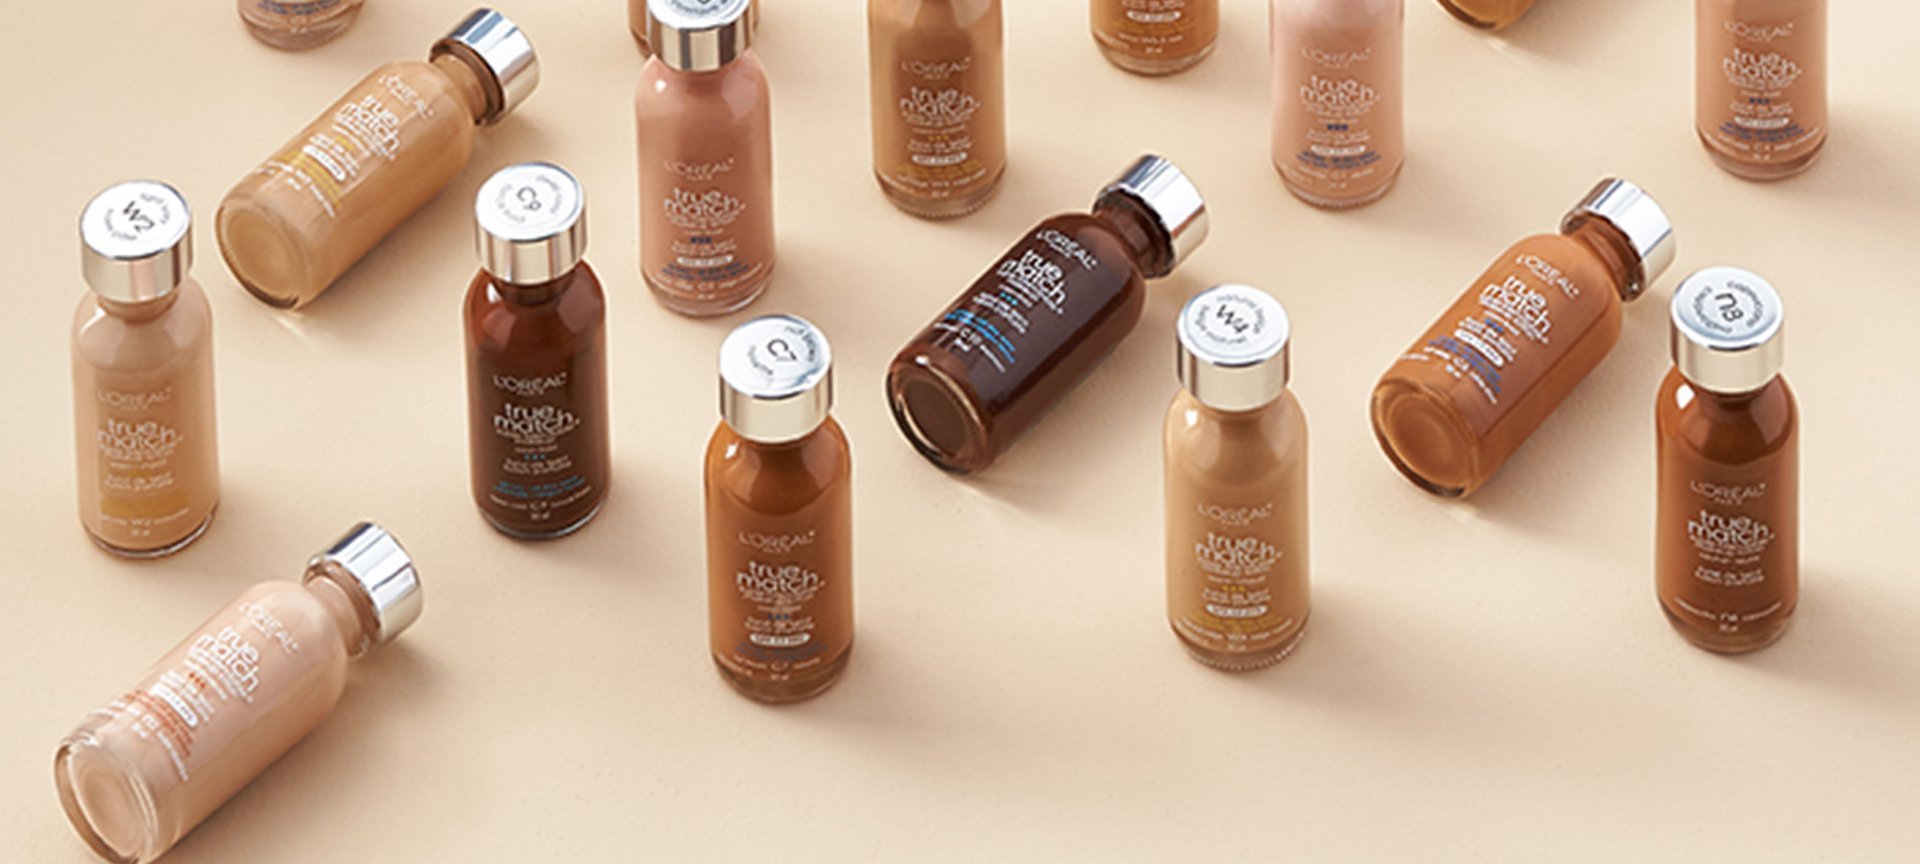 https://www.lorealparis.ca/-/media/project/loreal/brand-sites/oap/americas/ca/articles/blog/cosmetics/foundation-how-topicking-the-right-shade-for-your-skin-undertone.jpg